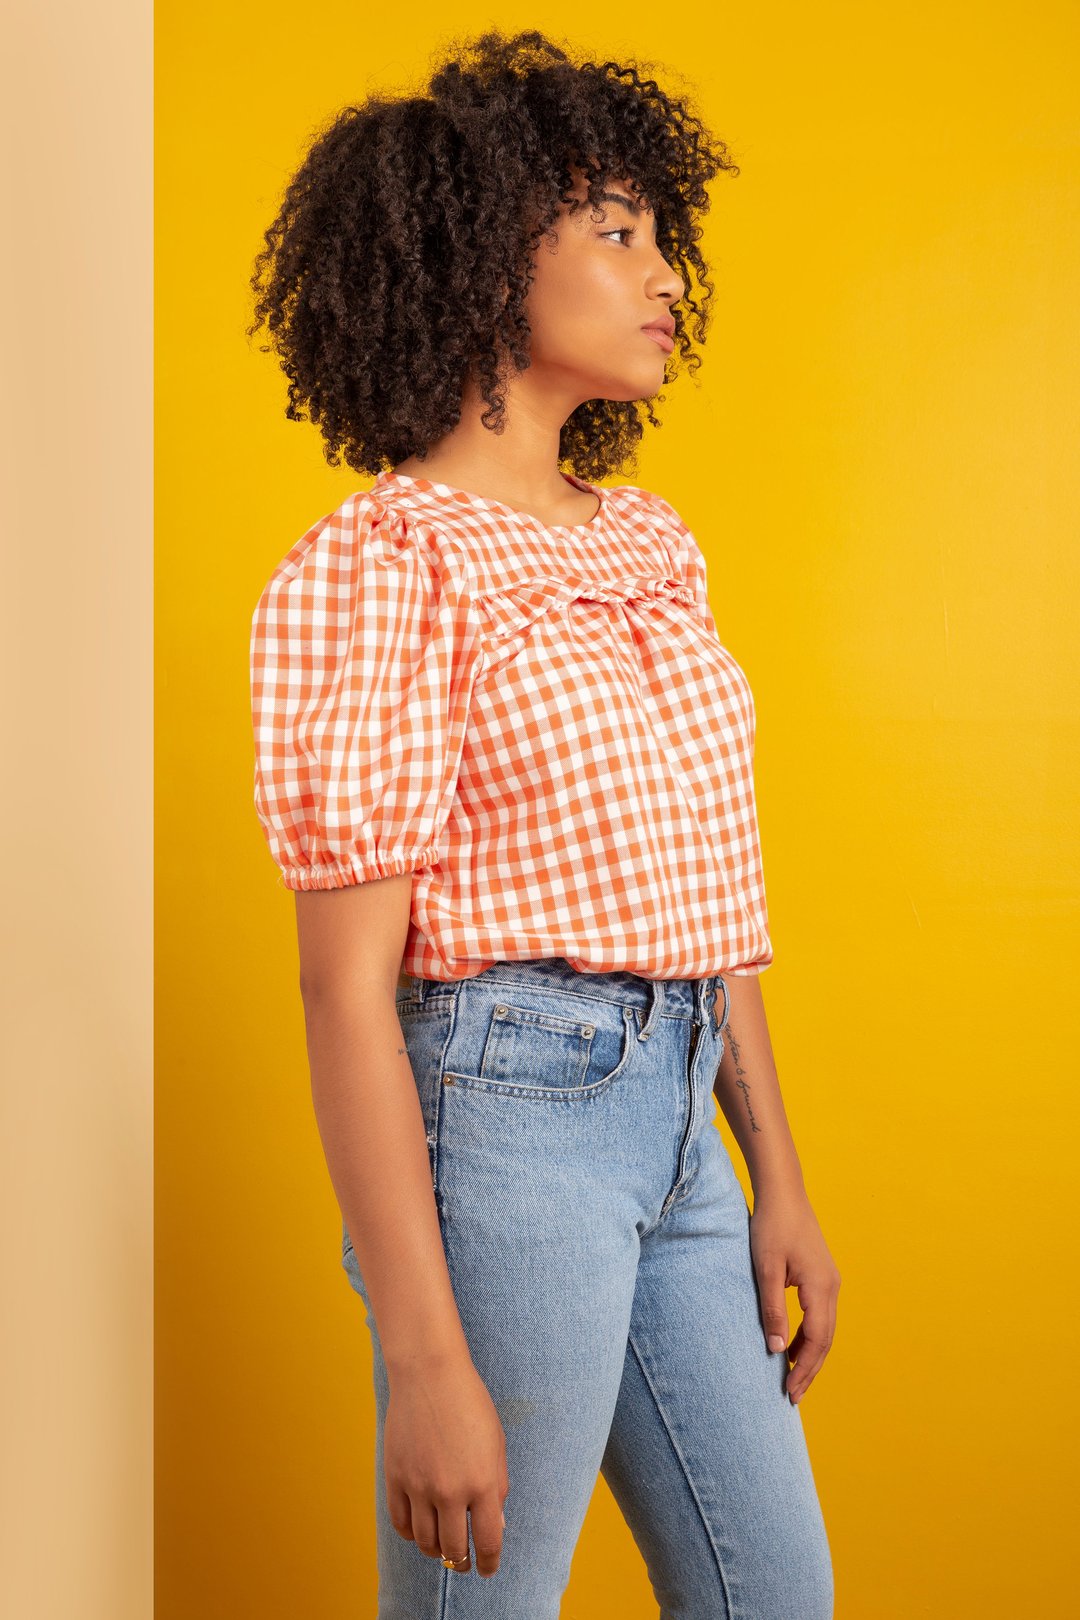 Garment Making Patterns: The Sagebrush Top by Friday Pattern Co.- Printed Pattern